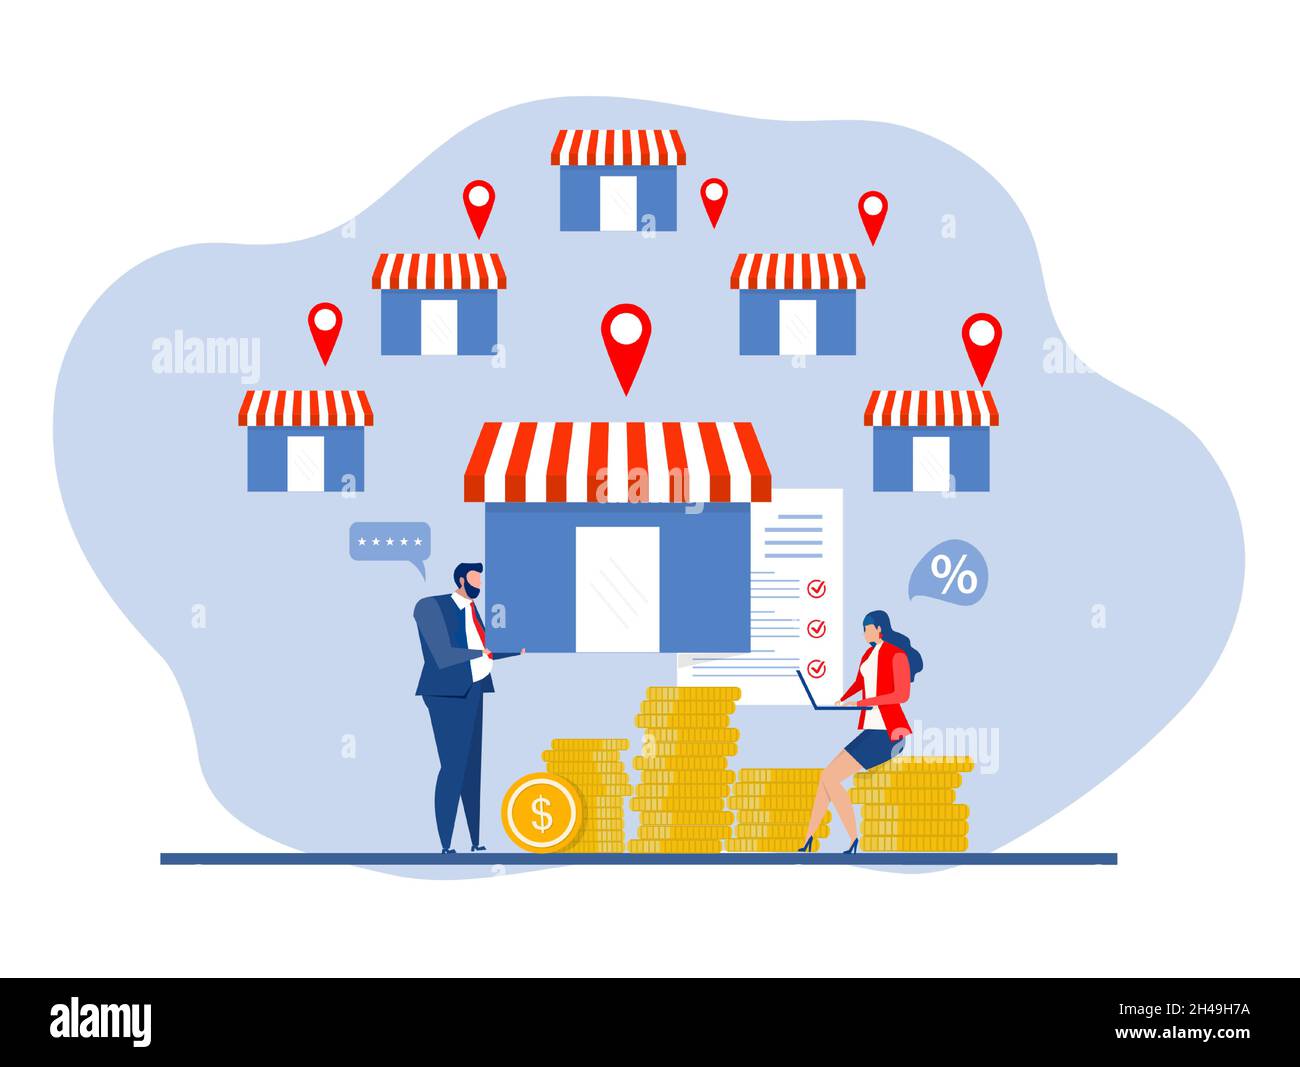 Franchise shop business,People shopping and Start Franchise Small Enterprise, Company or Shop with Home Office,vector illustrator Stock Vector